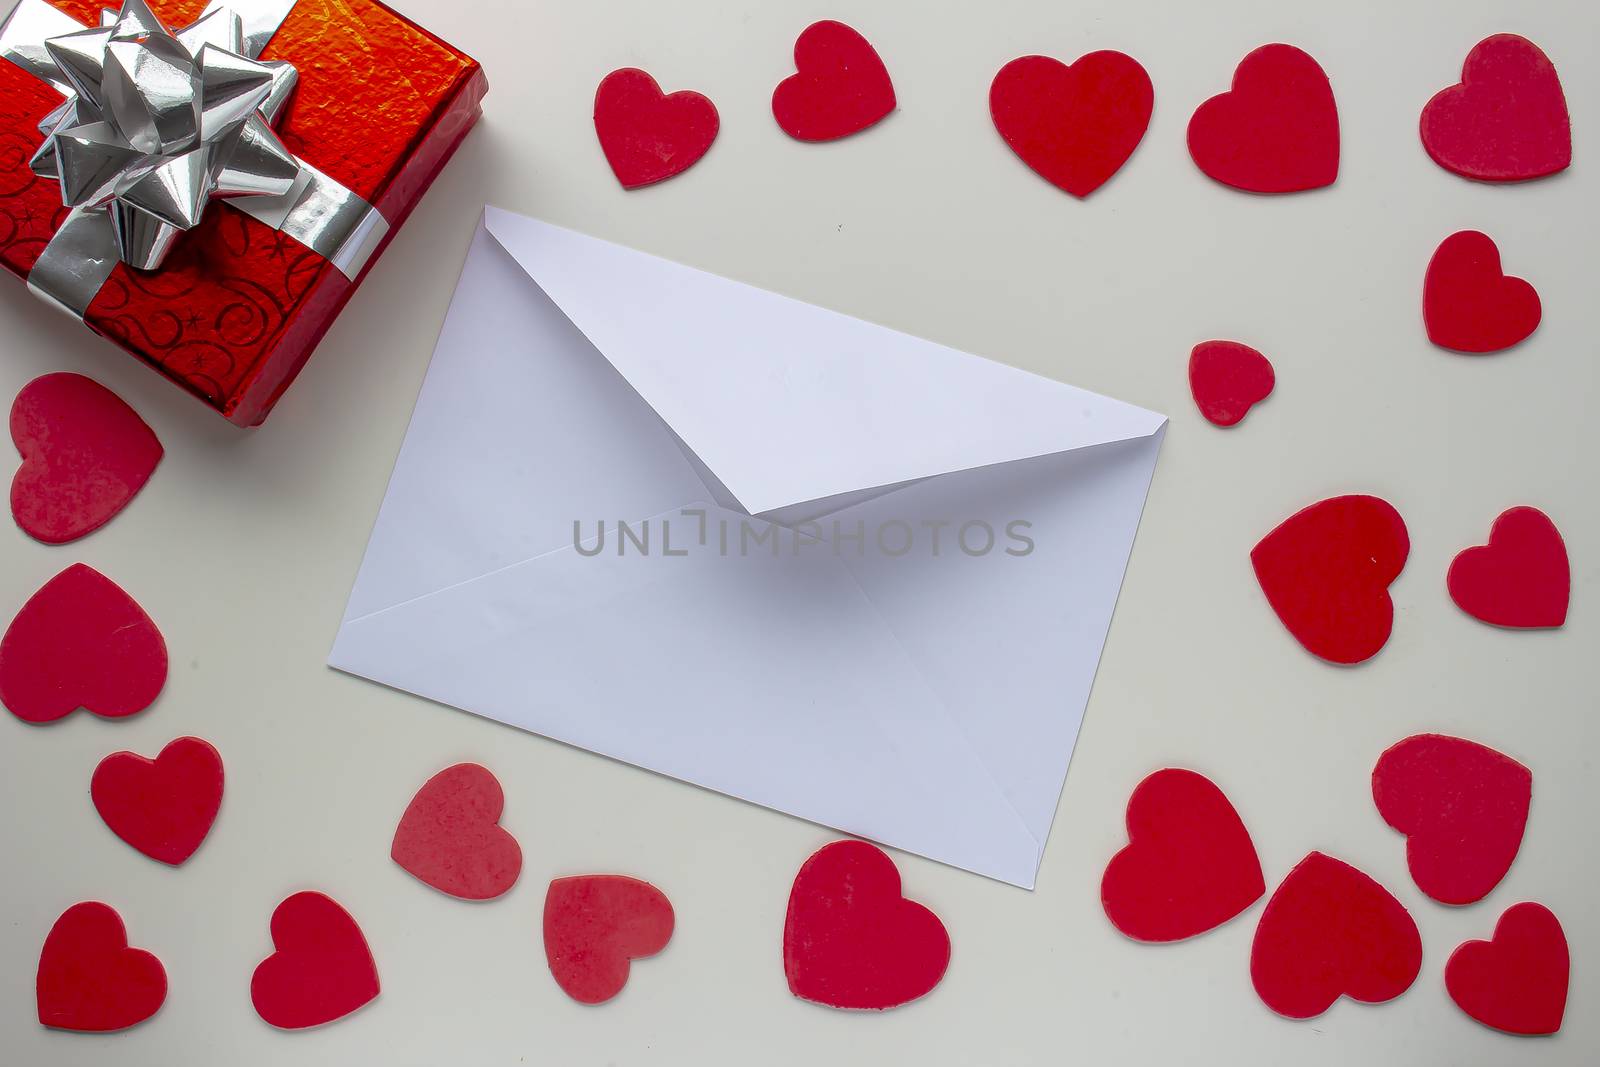 paper letter envelope with a present box gift with hearts around by oasisamuel